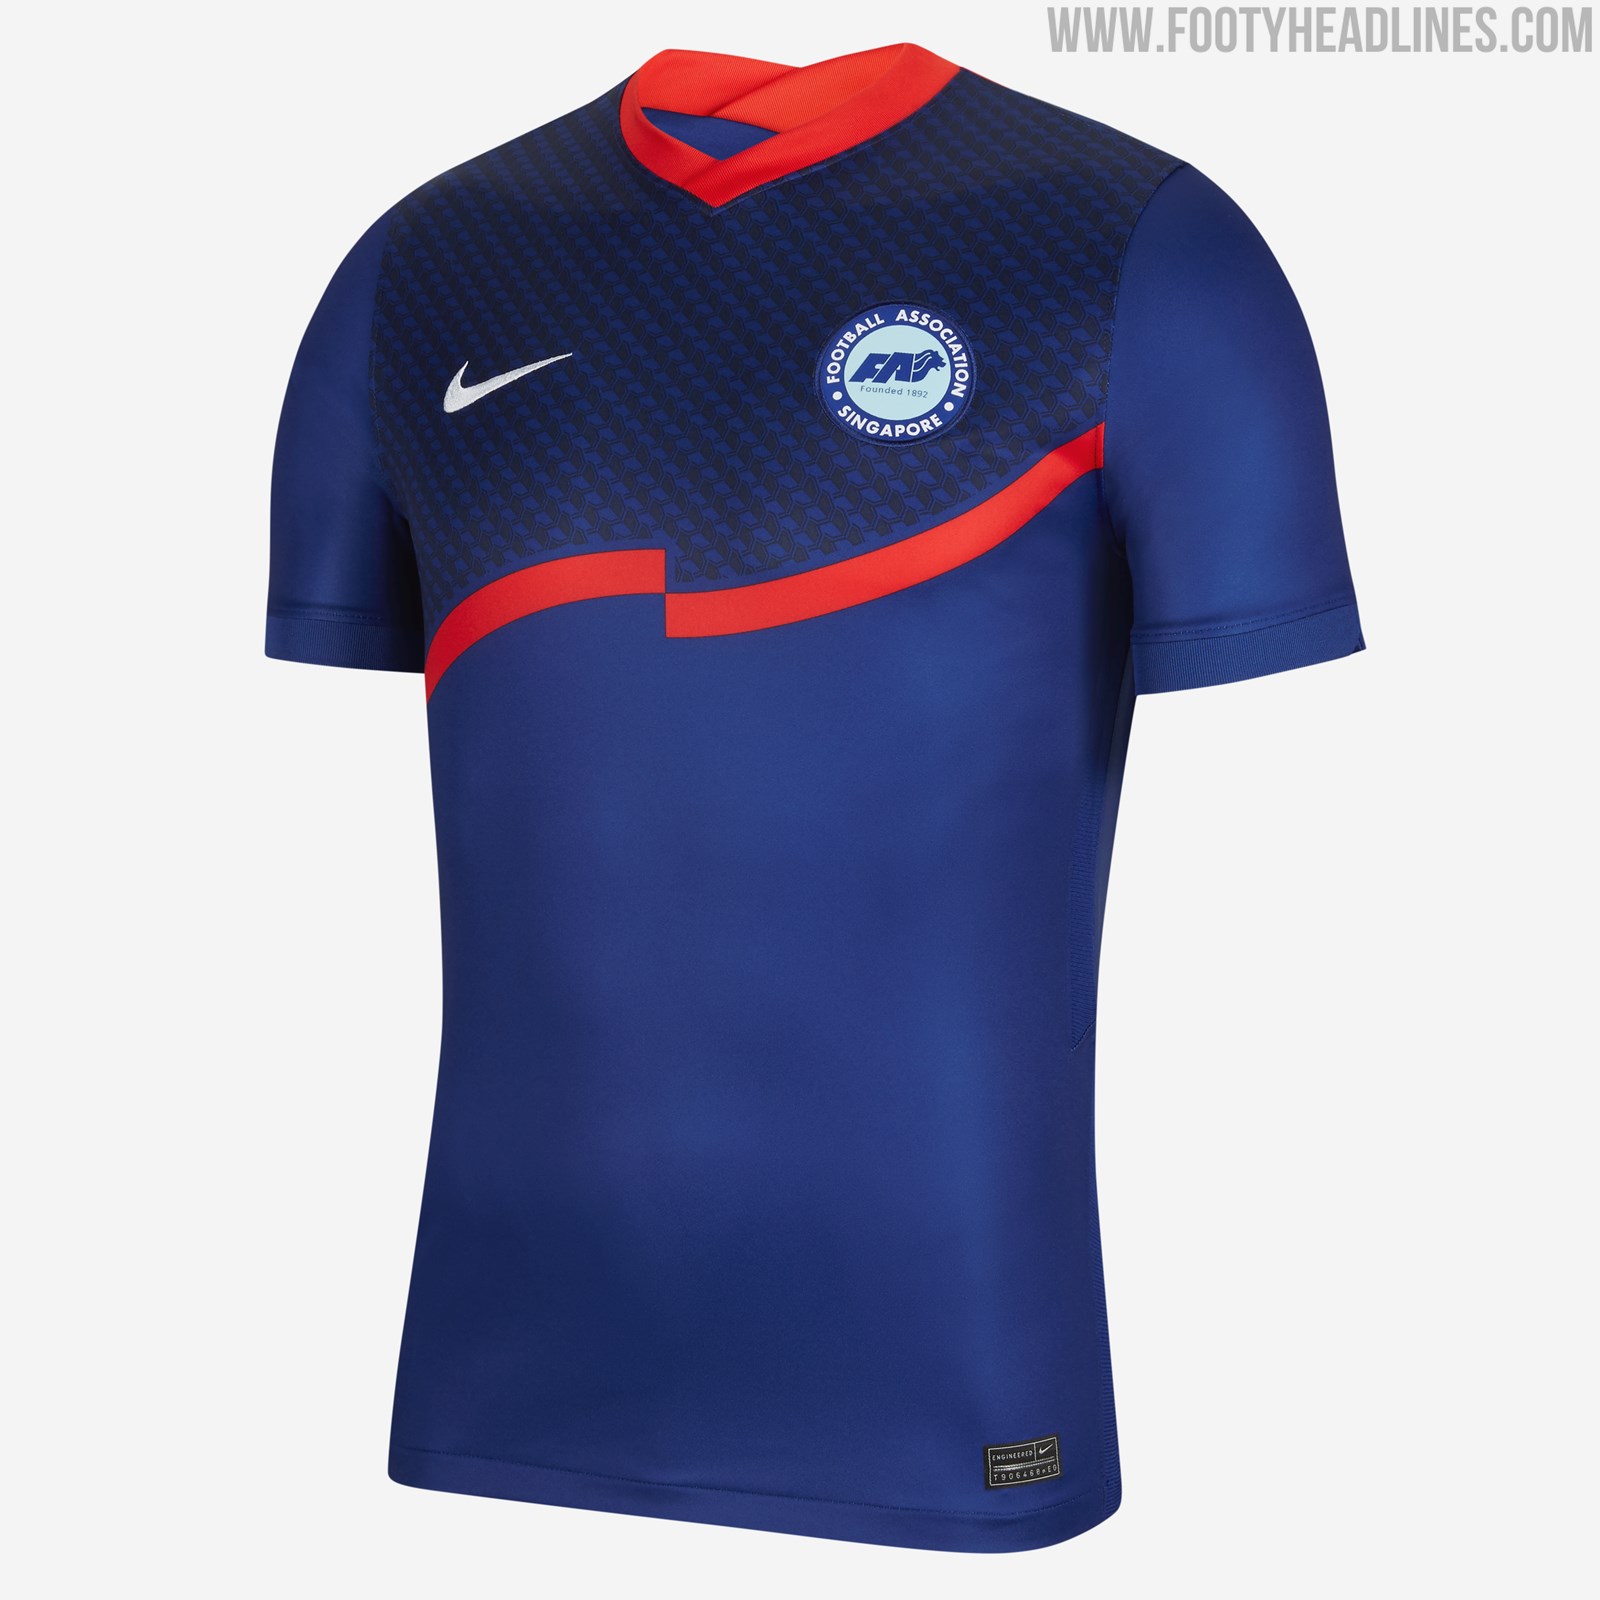 Nike Singapore 2020 Home & Away Kits Released - Feature Crest Instead ...